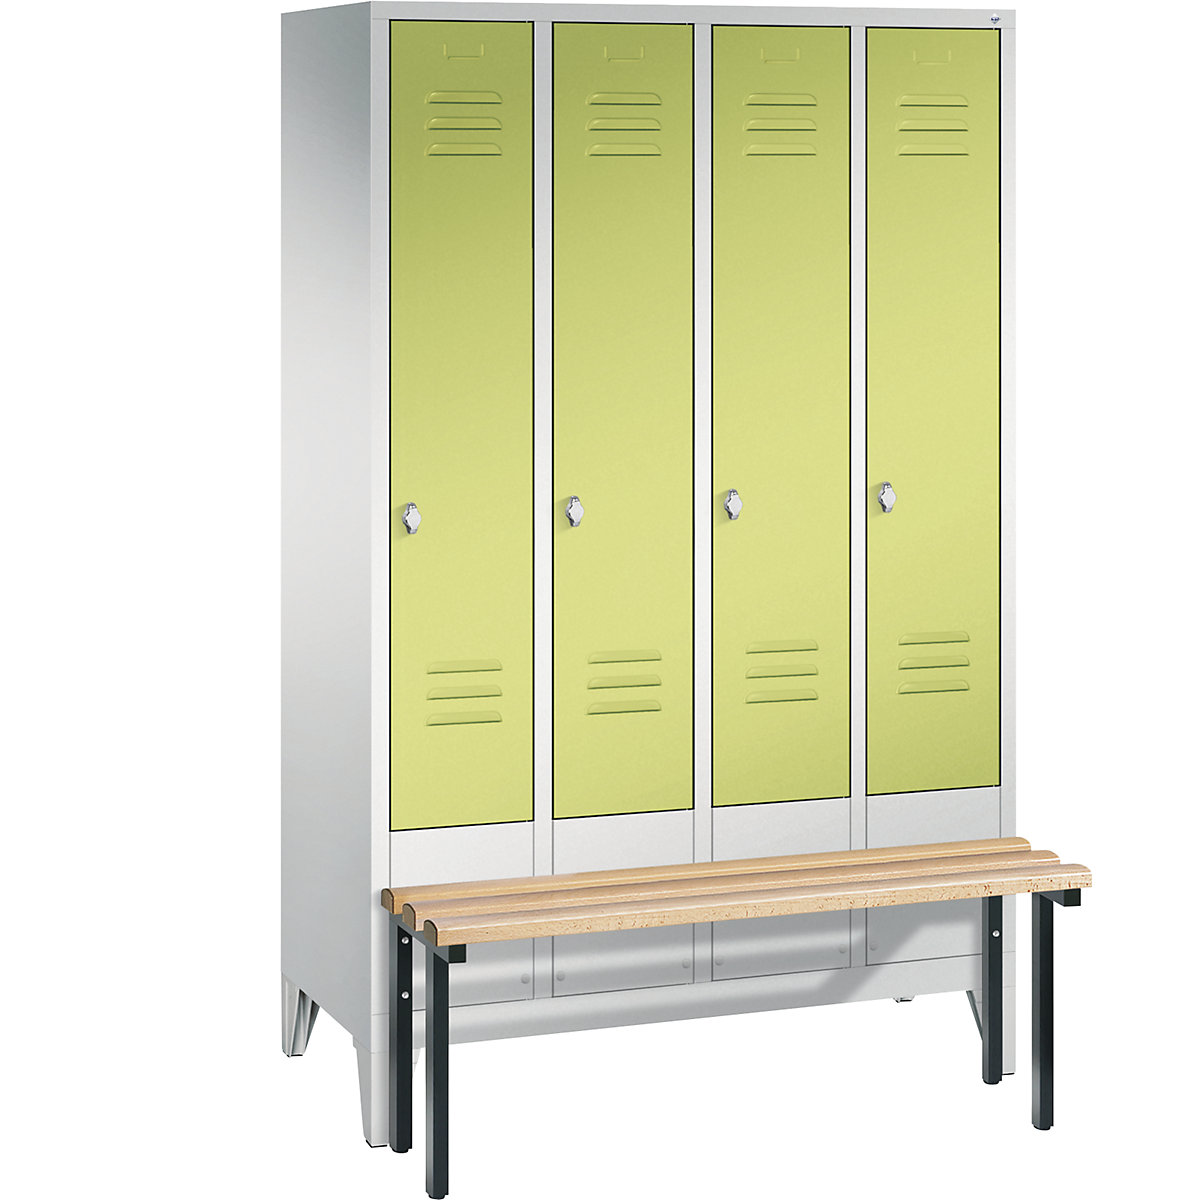 CLASSIC cloakroom locker with bench mounted in front – C+P, 4 compartments, compartment width 300 mm, light grey / viridian green-8